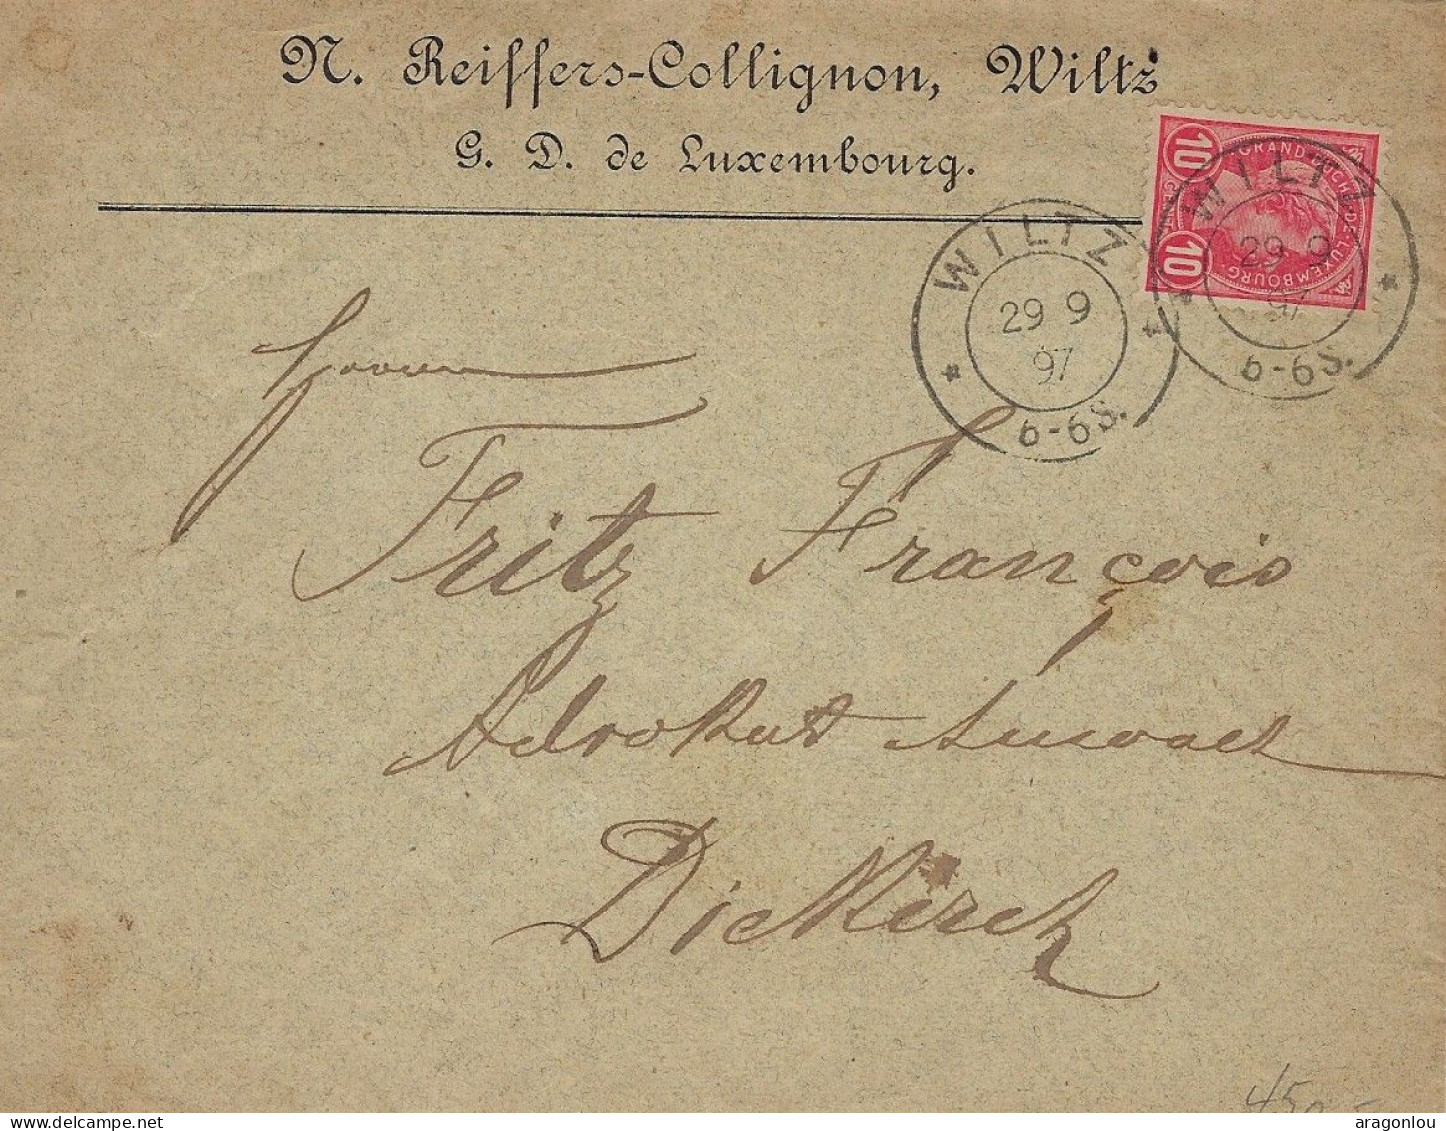 Luxembourg - Luxemburg - Lettre   1897   Adolphe    N. Reiffers - Collignon , Wiltz - 1891 Adolphe Front Side